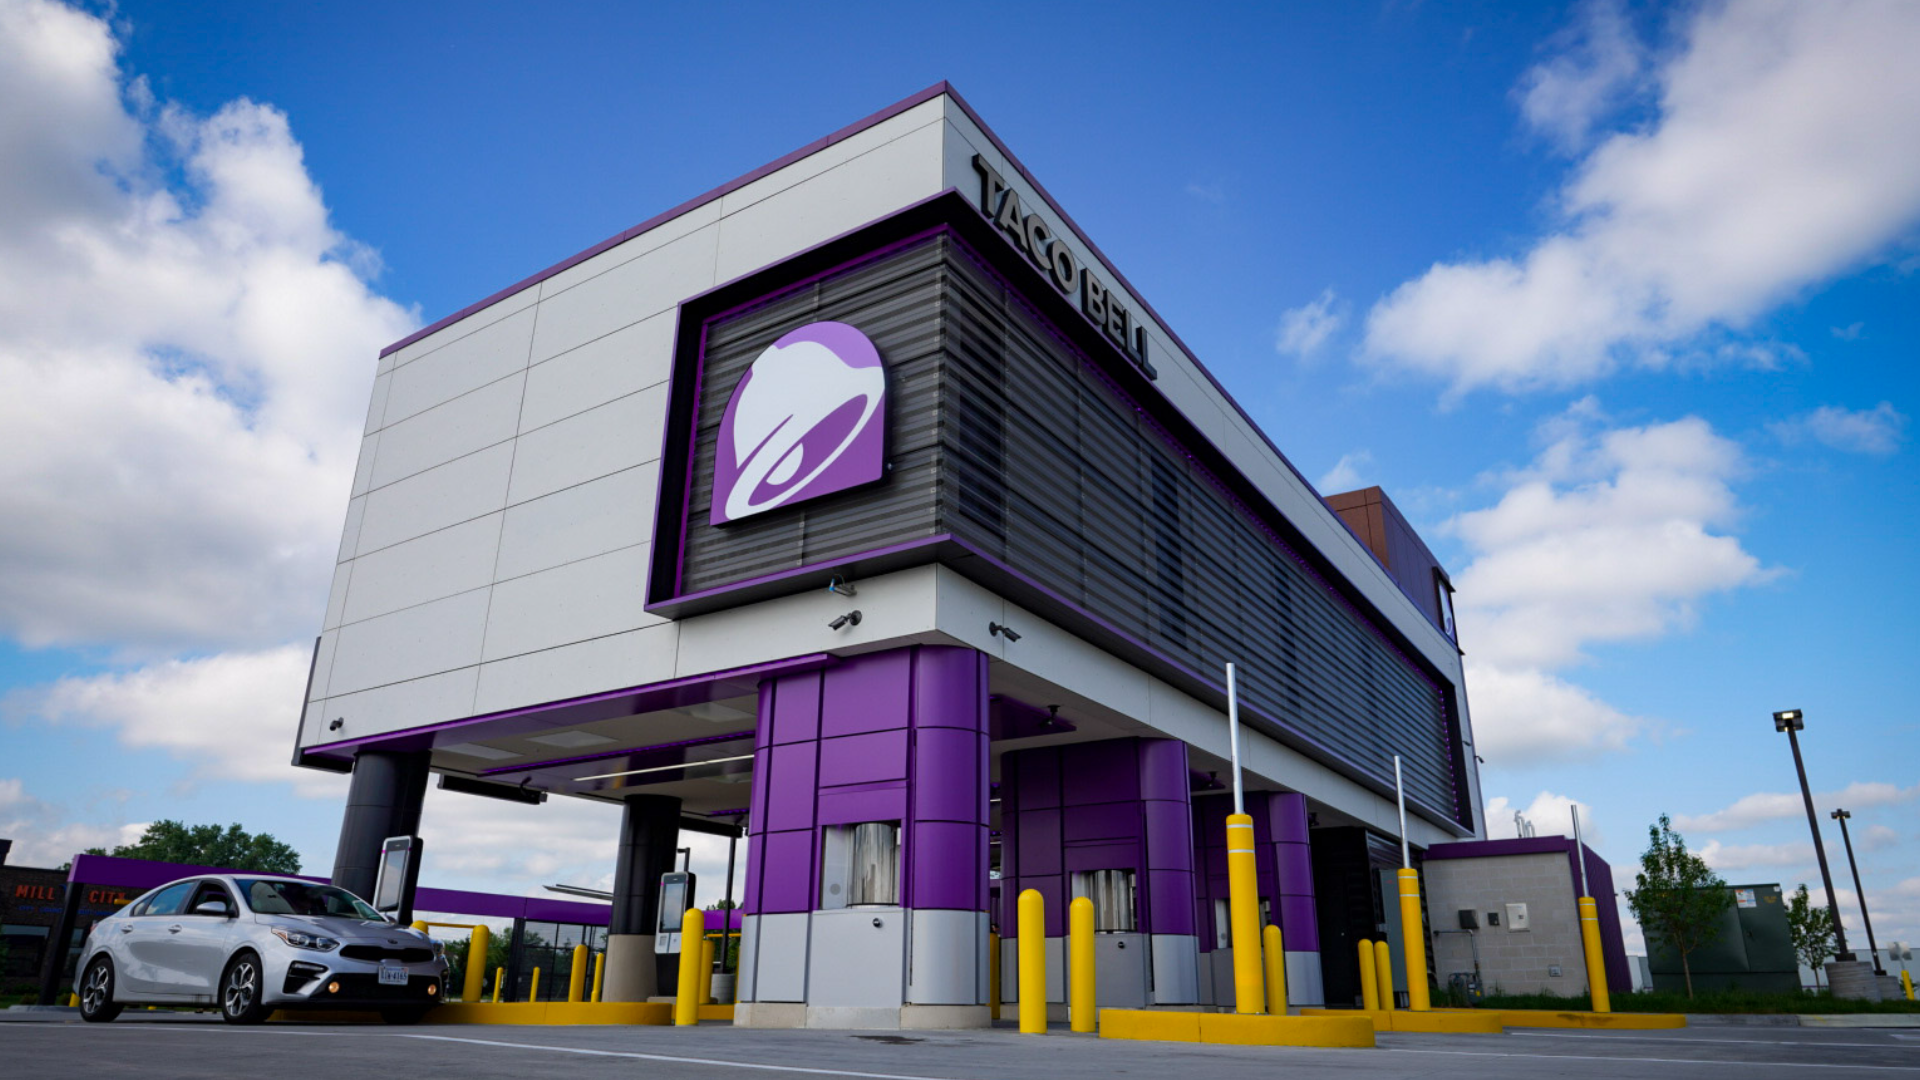 The new Taco Bell concept, now open in Brooklyn Park, uses hydraulic lifts to lower food from the second floor kitchen to people in the drive-thru lanes below.